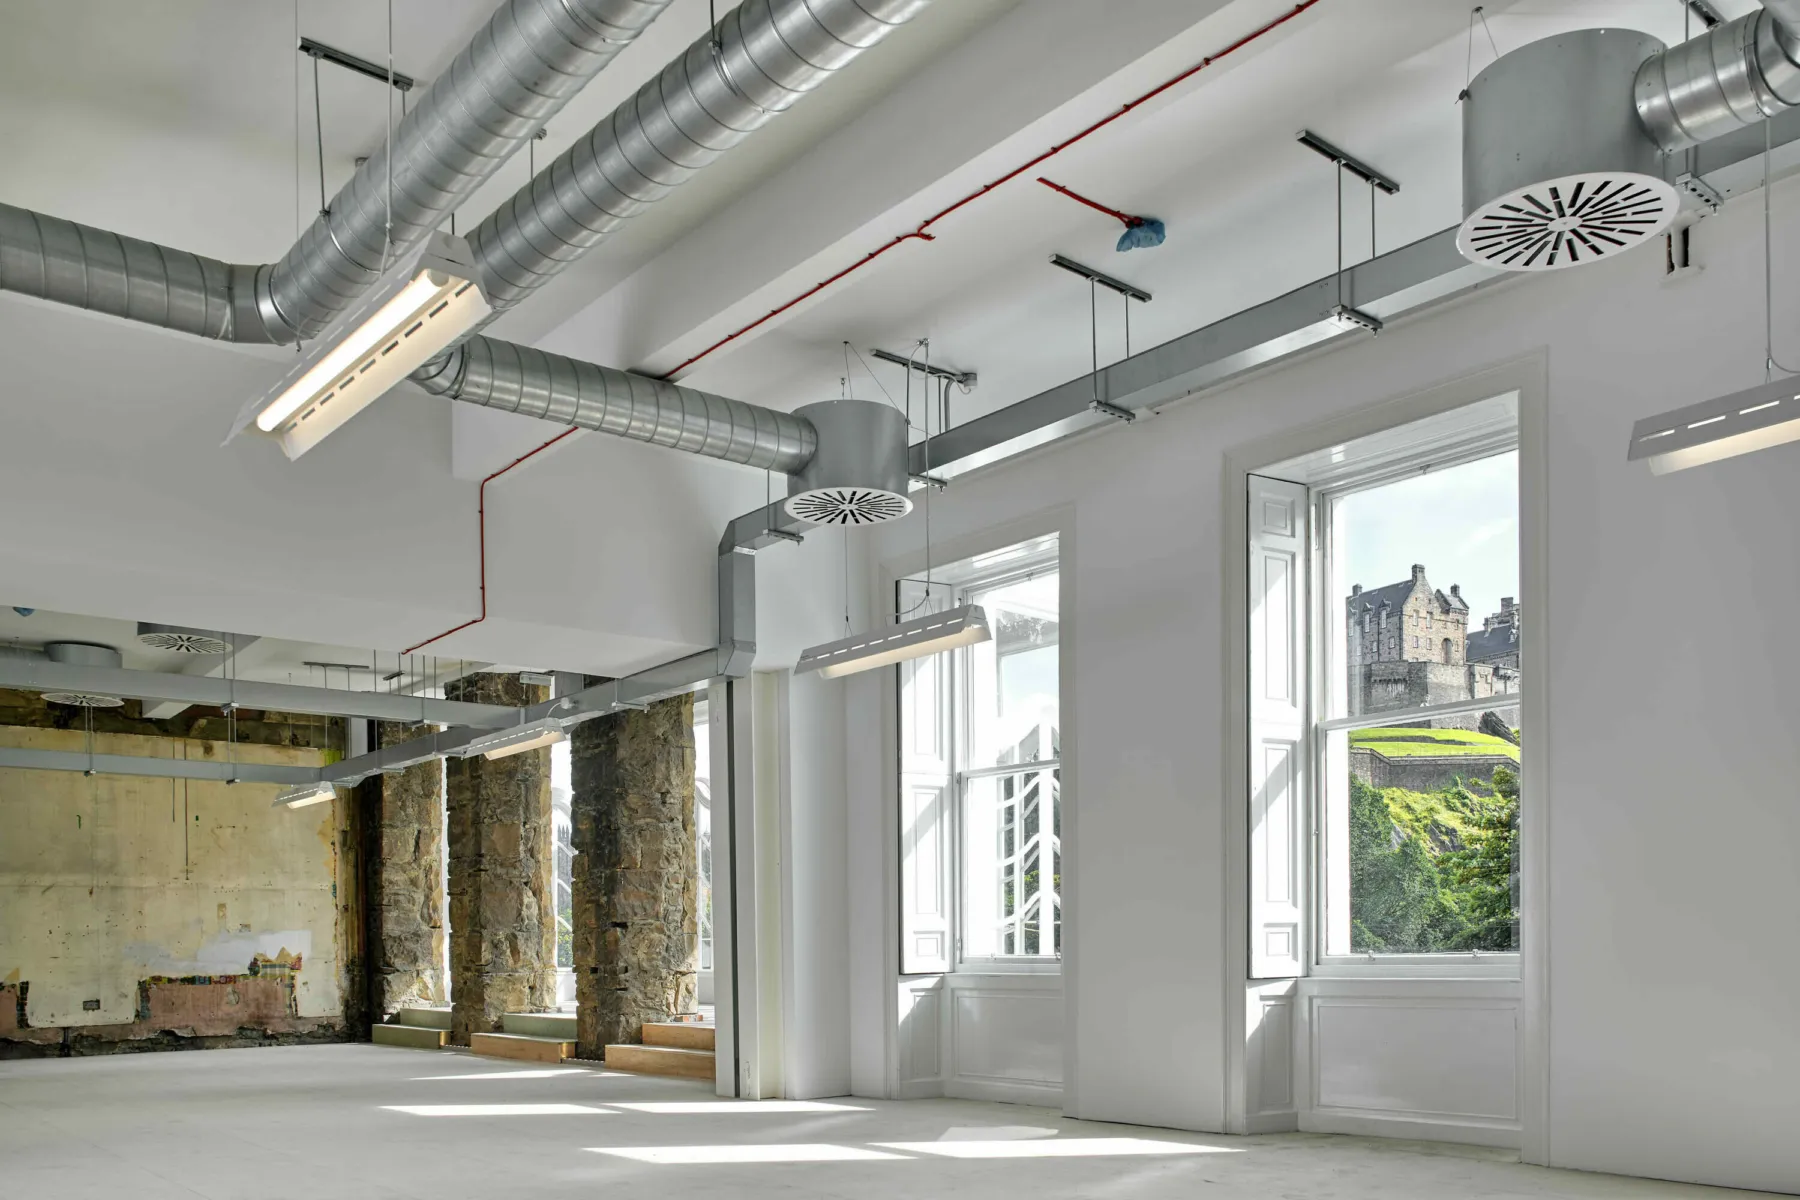 Inside a refurbished listed building on Princes St Edinburgh. Exposed stone work and ducting is contrasted with cornicing and panelling. The space has been restored to be used as office accommodation. Through the window, a view to Edinburgh Castle.